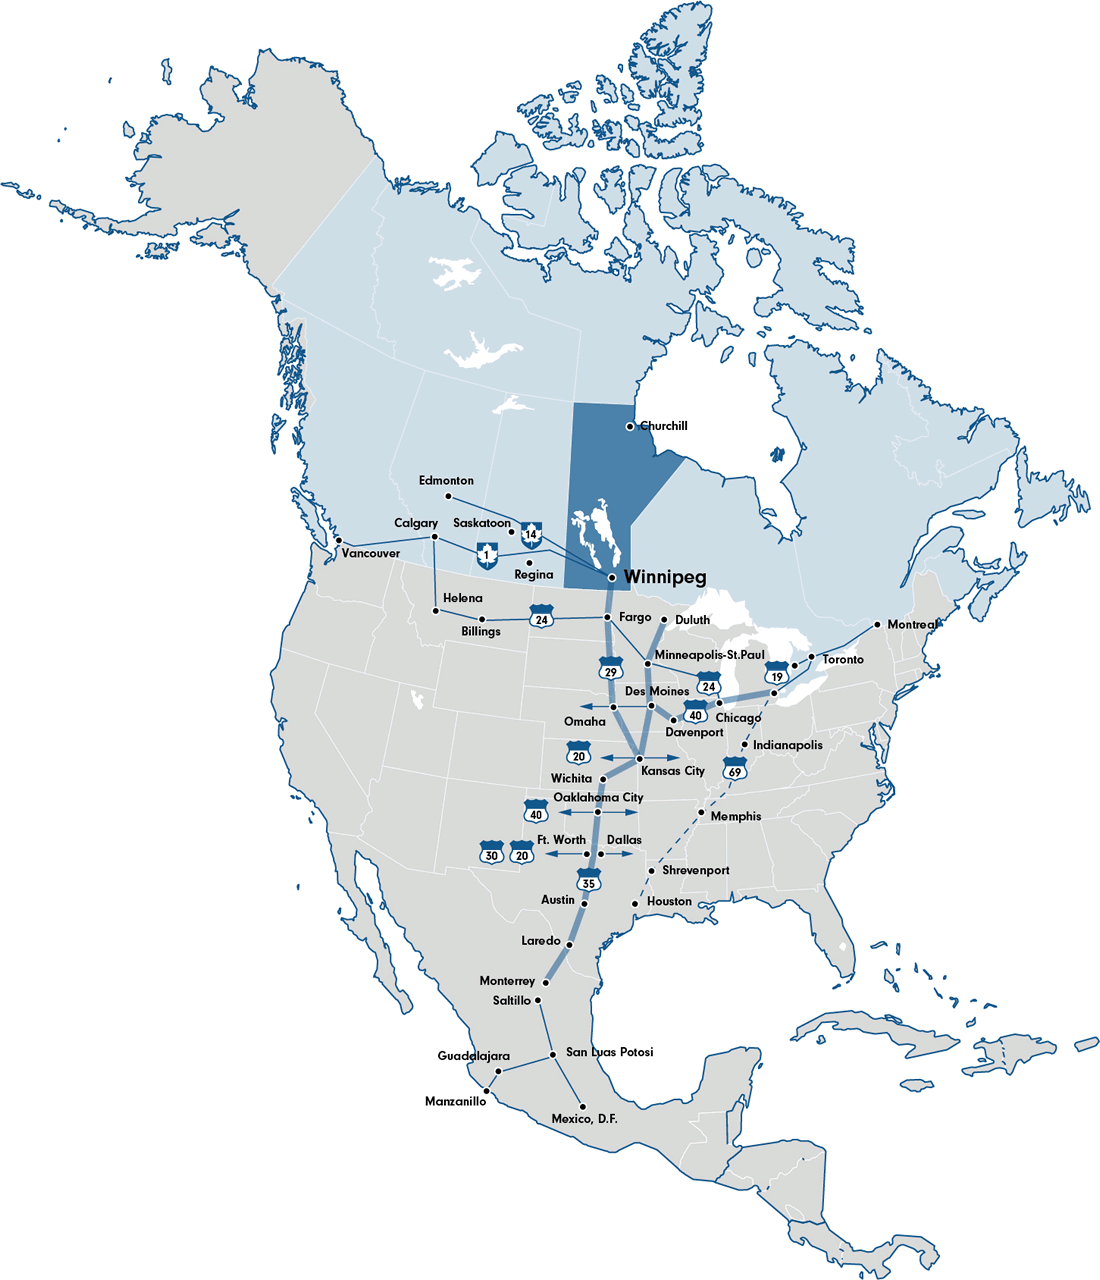 map of Mid-Continent trade and transportation corridor between Mexico and Canada